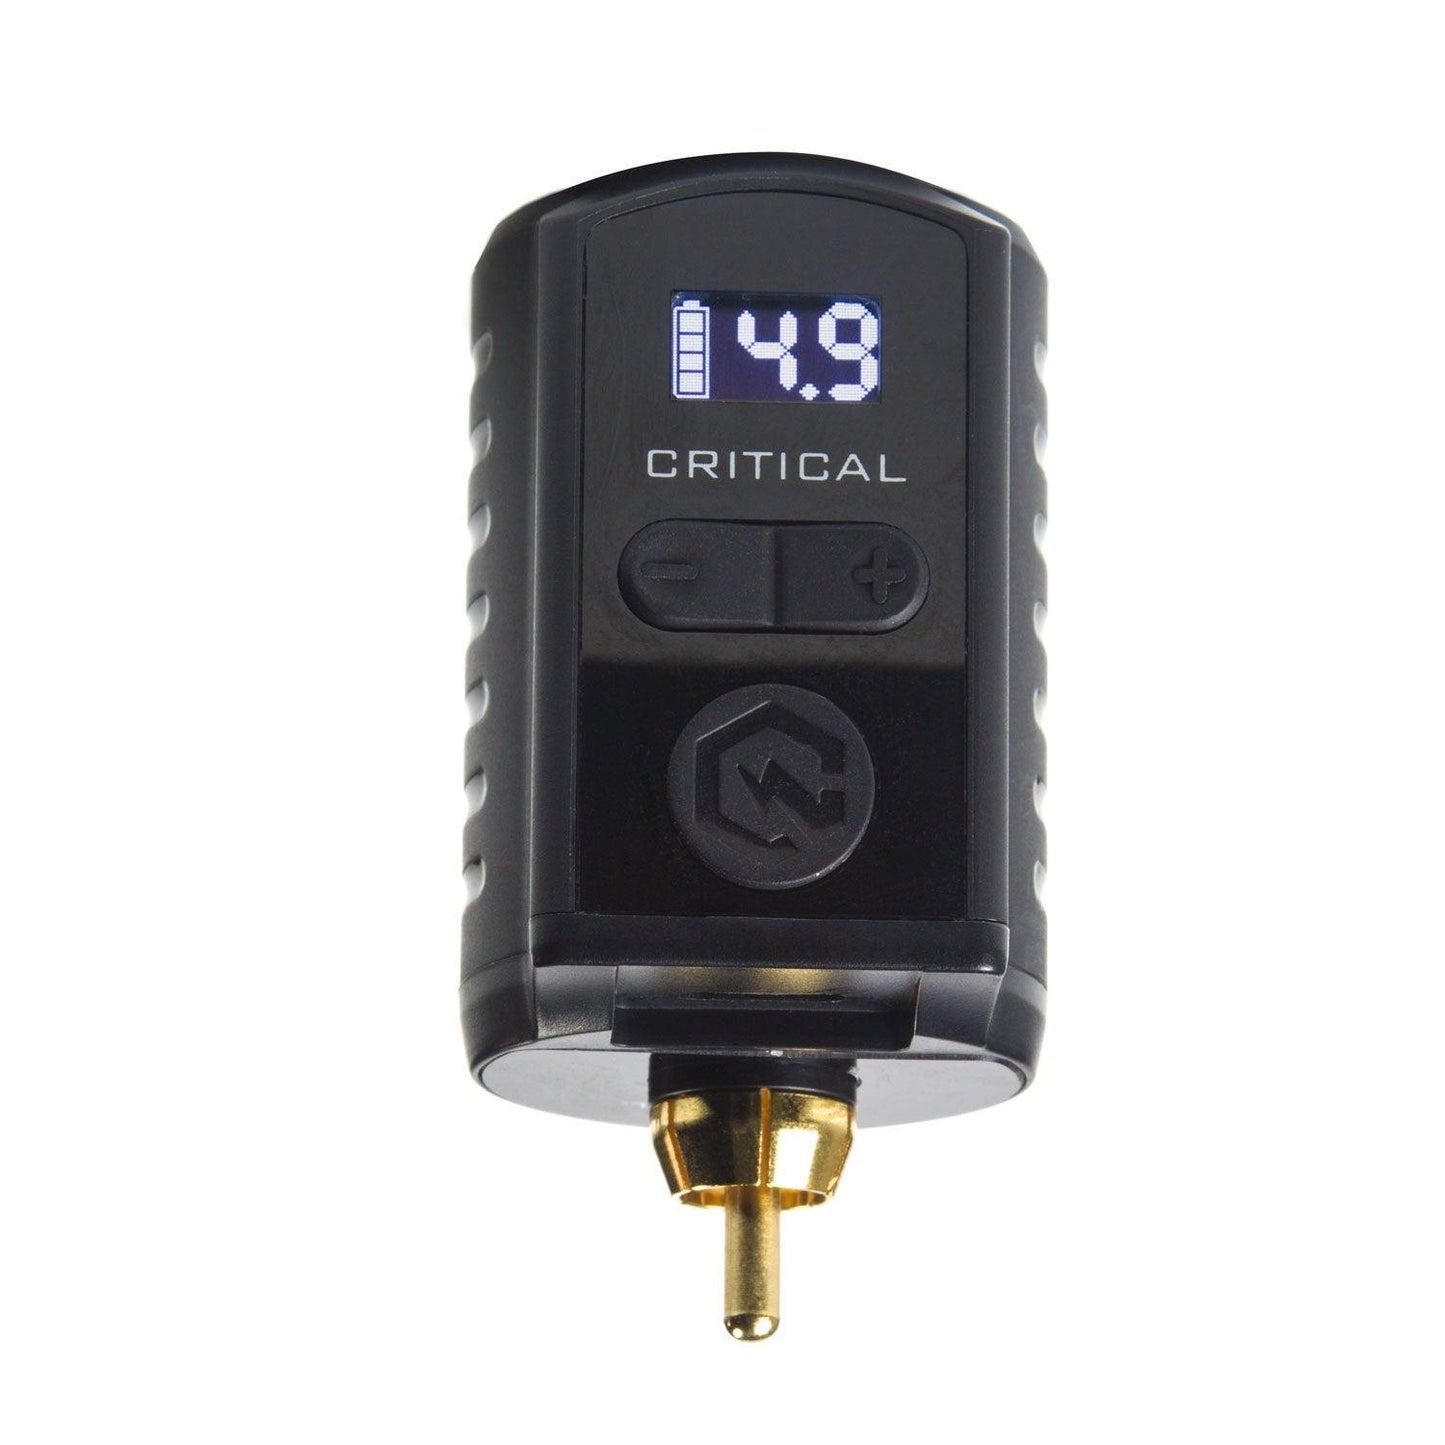 Critical Universal Battery - RCA/DC Connection - Tattoo Everything Supplies